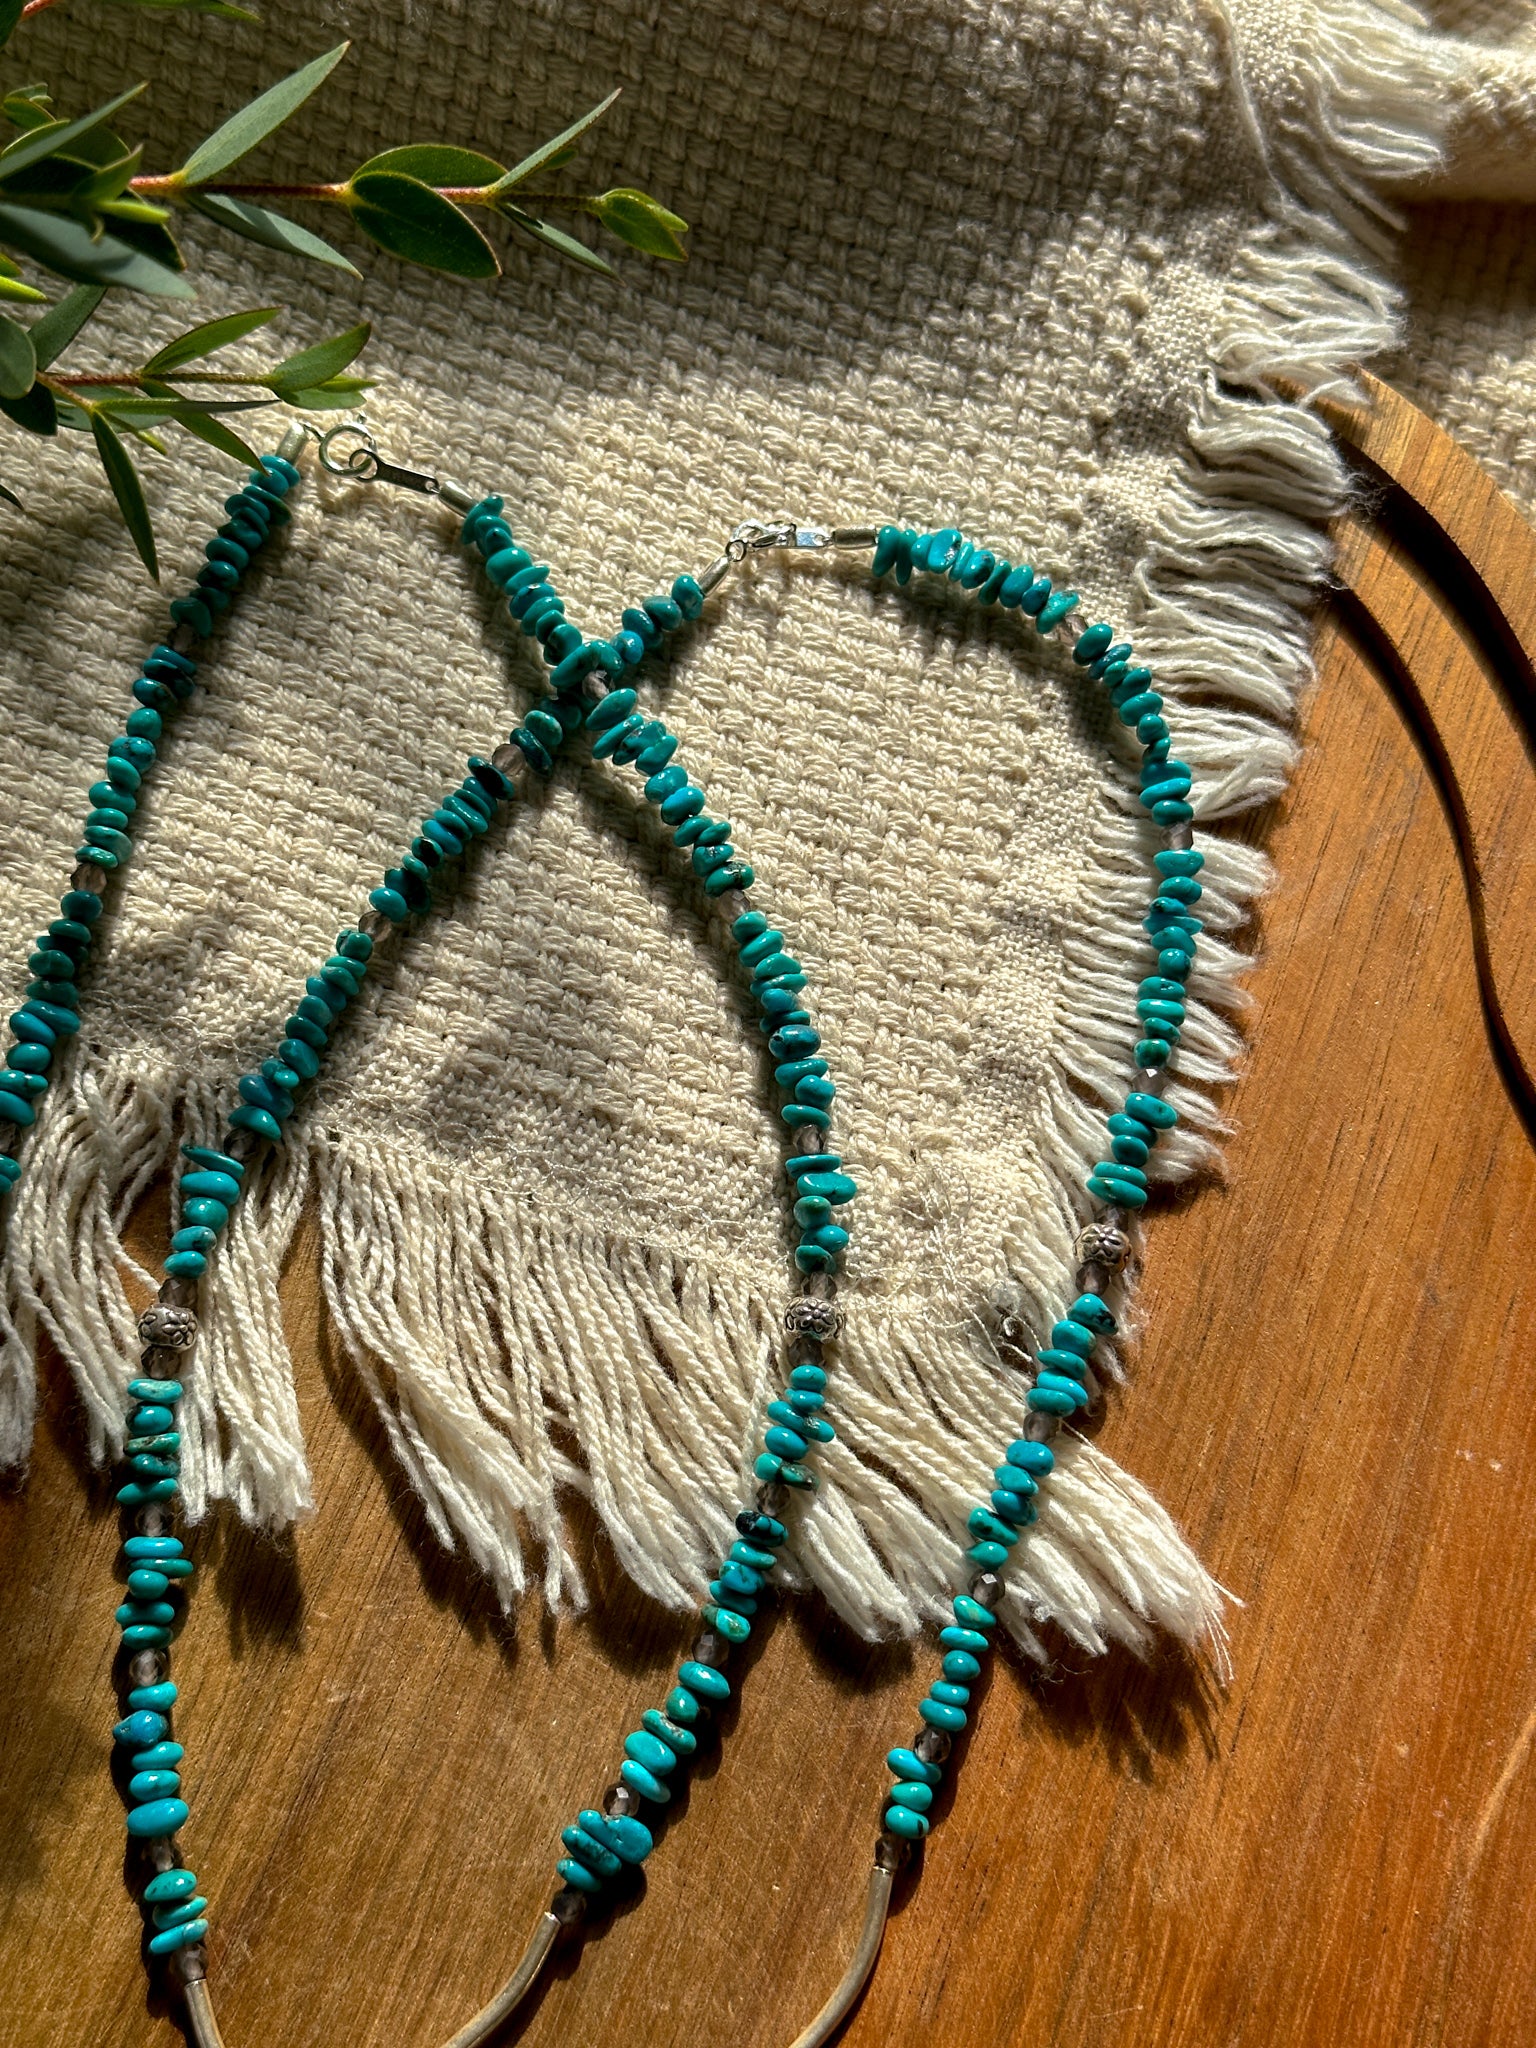 Karen Silver Necklace - Ice Obsidian and Turquoise - daisy doe